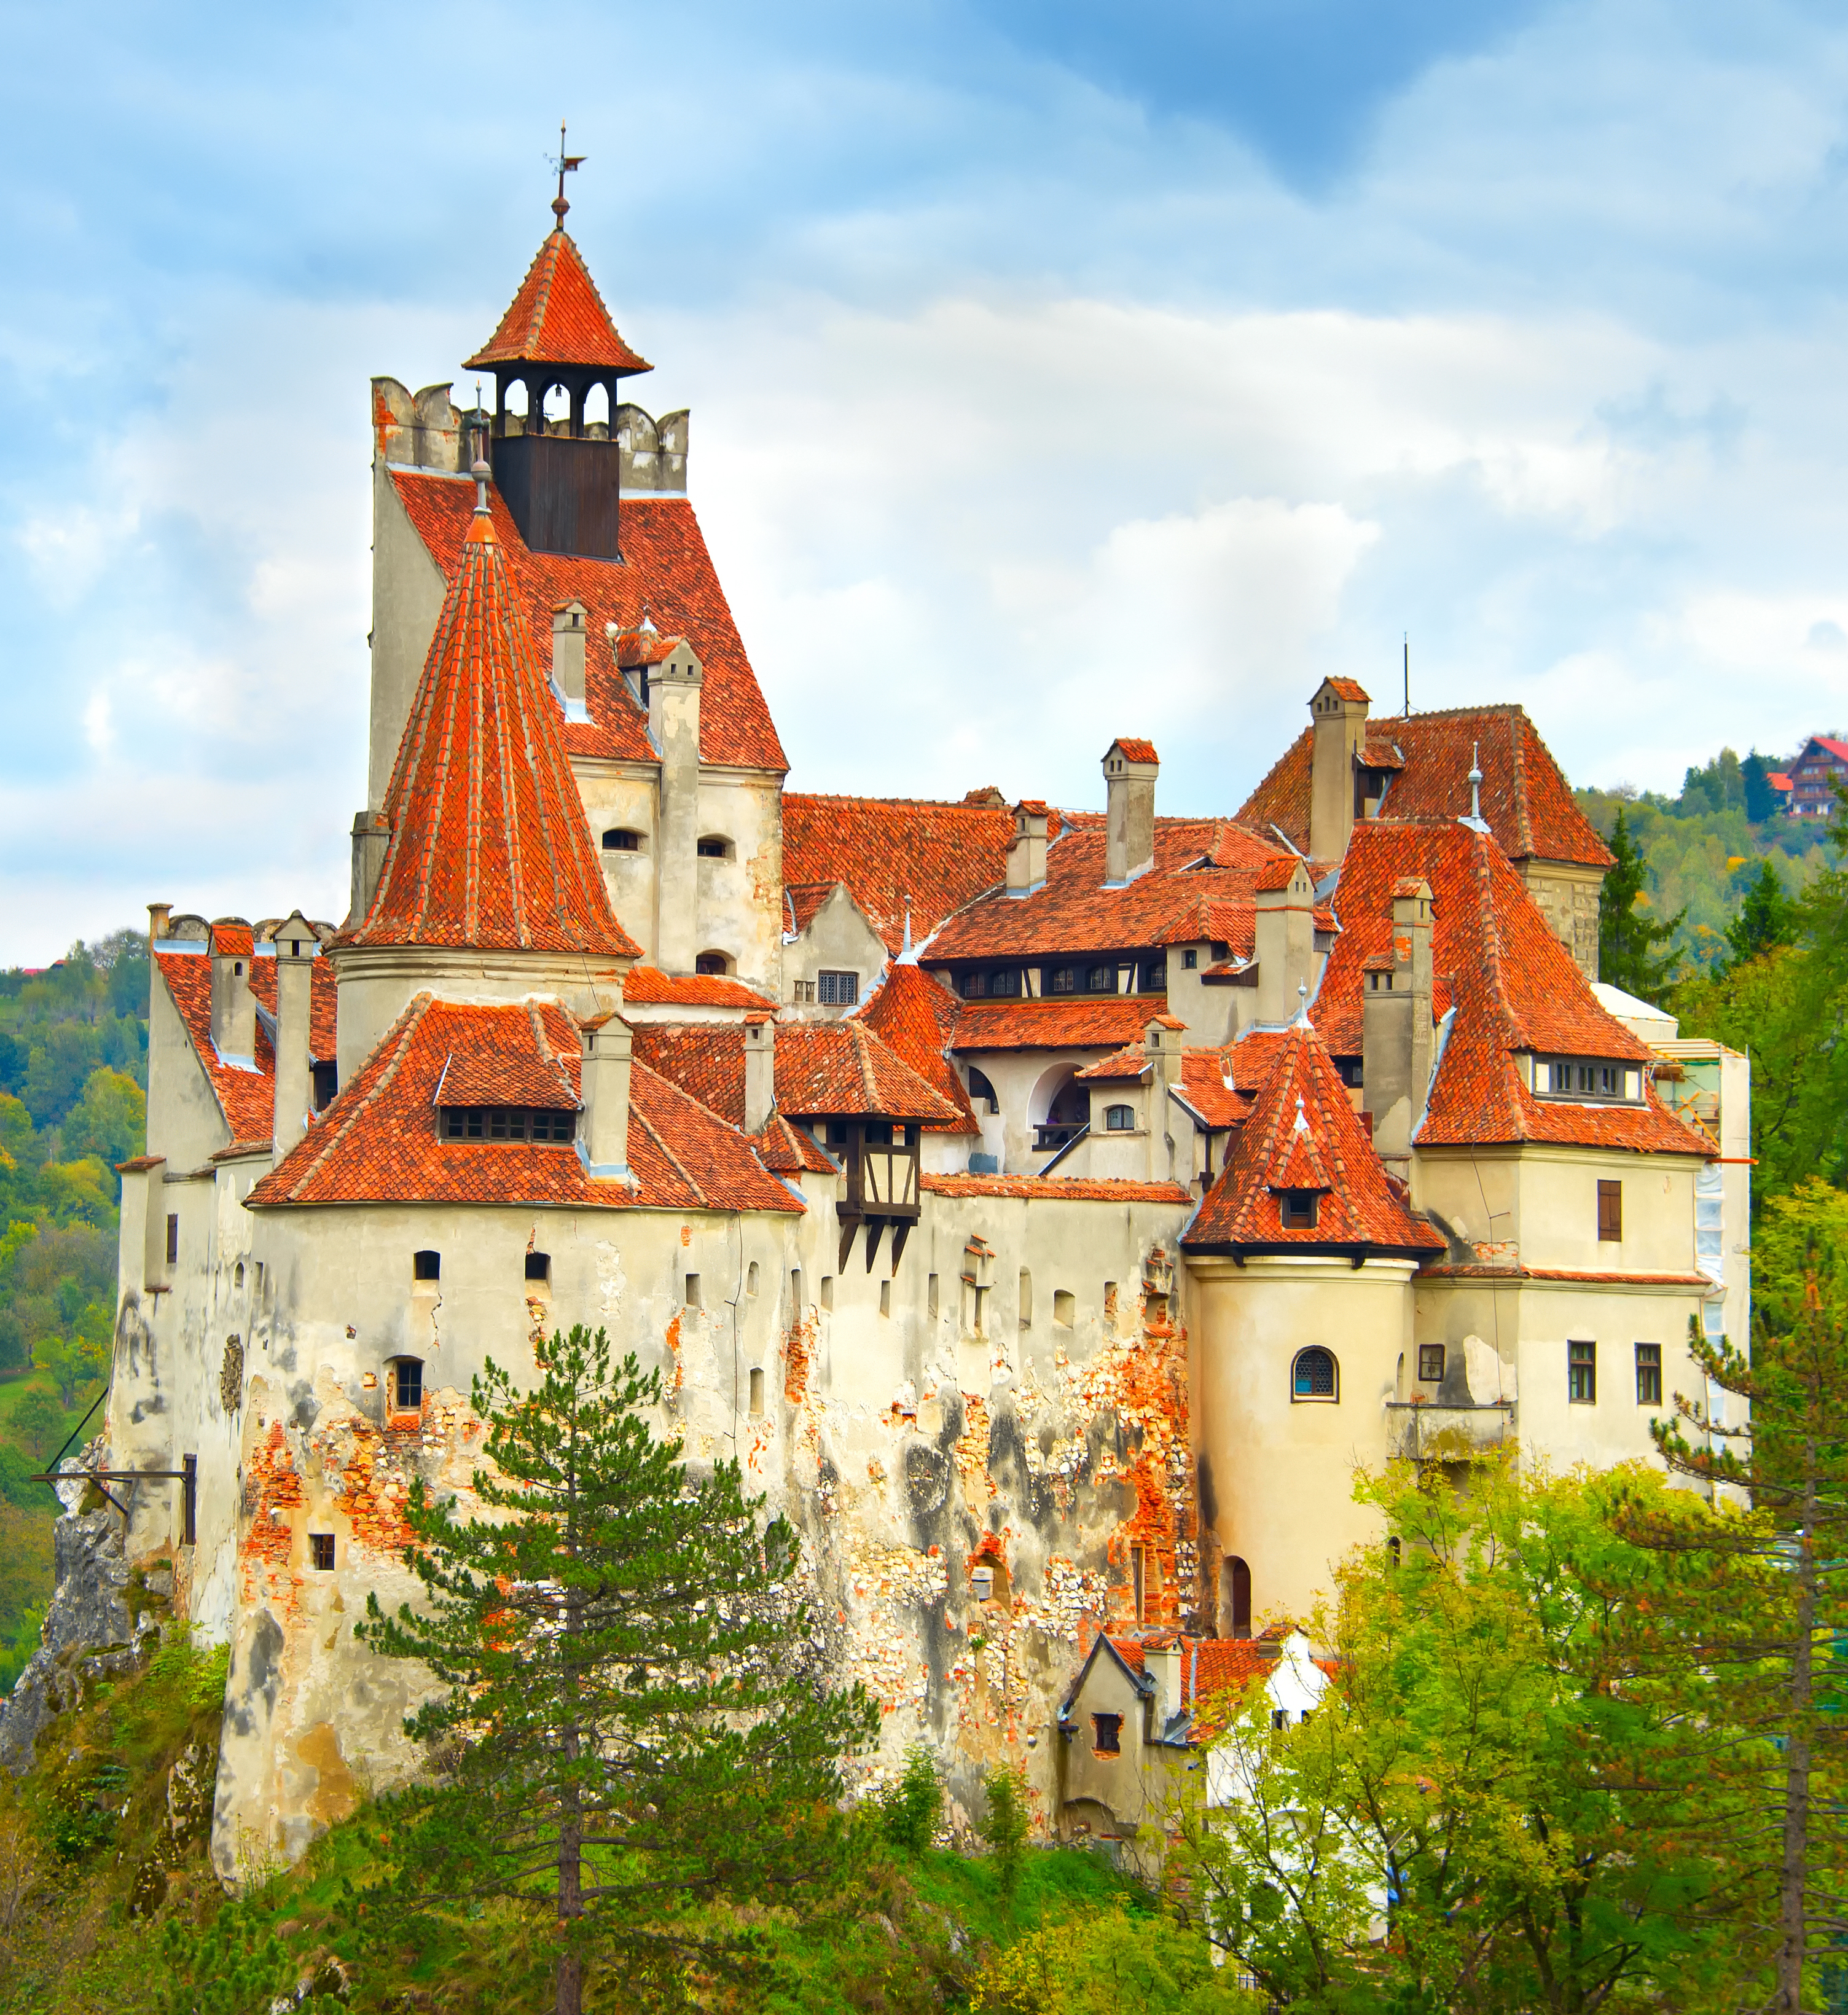 Check Out These European Castles for Your Next Family Vacation - Bran Castle